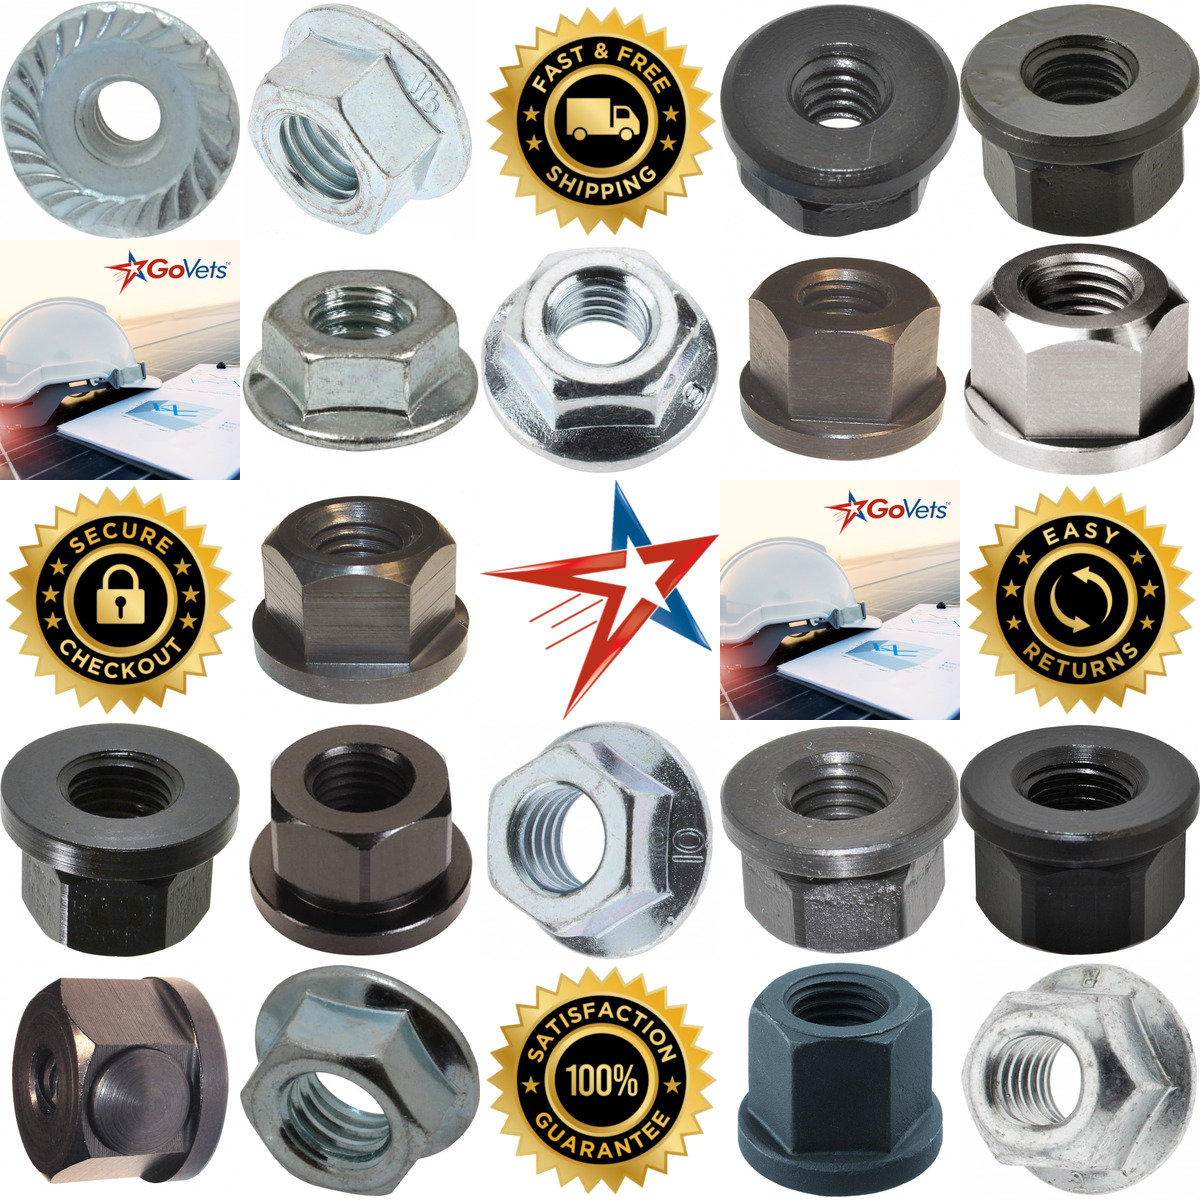 A selection of Flange Nuts products on GoVets